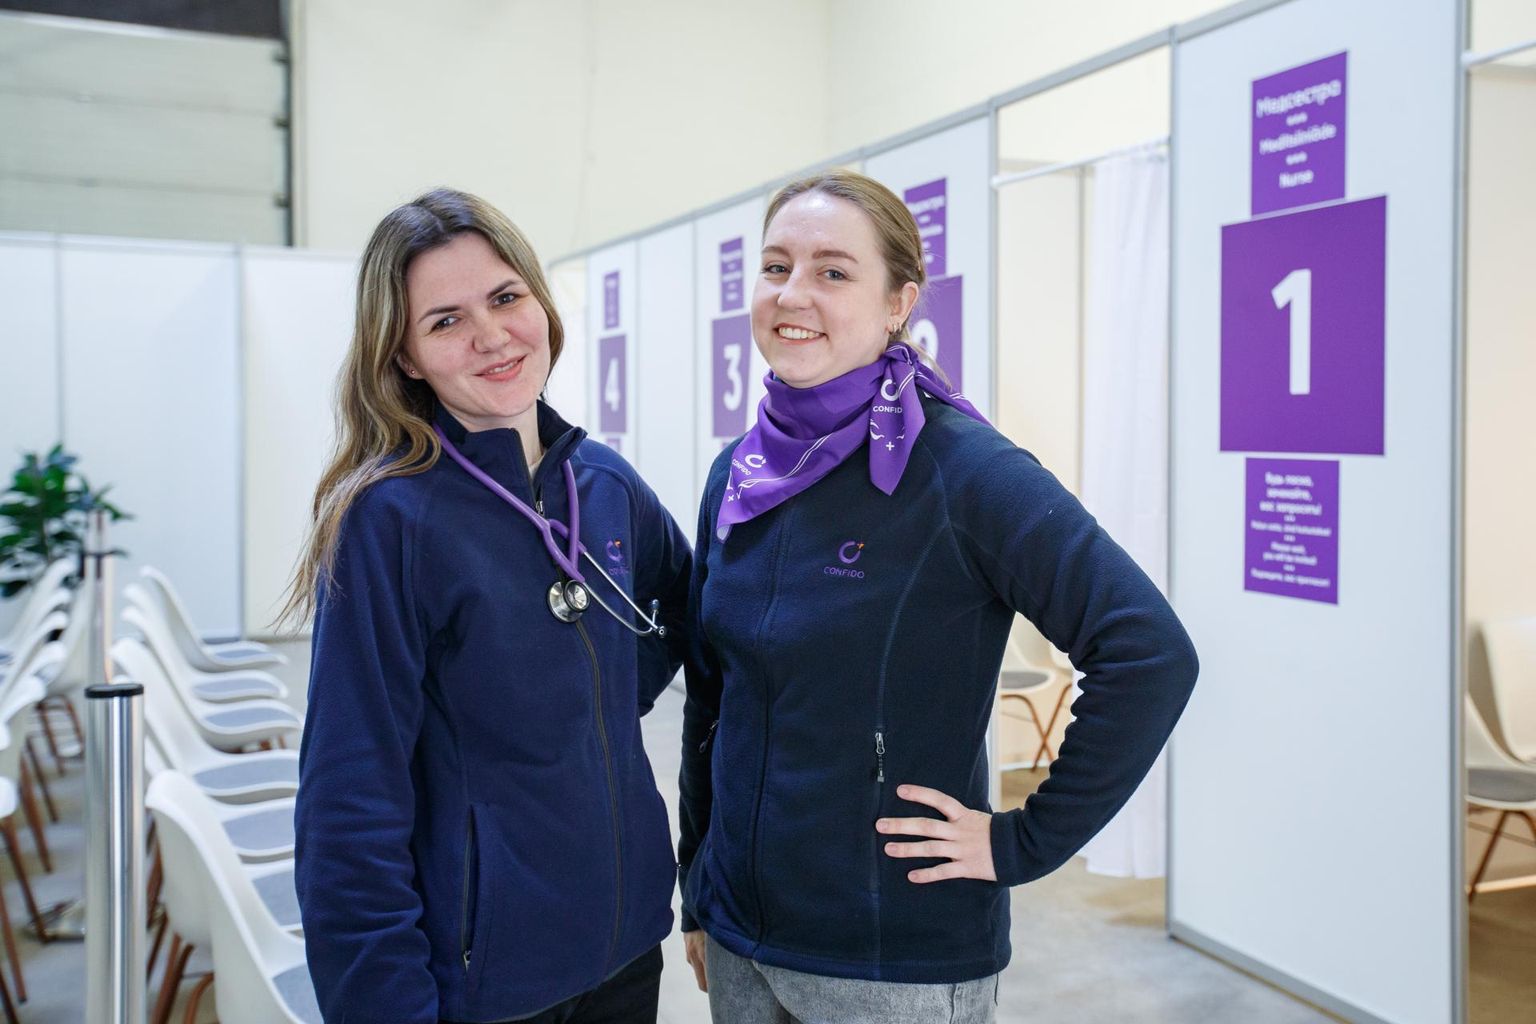 Cutter Shetetin (left) and Oleksandra Pissorenko, who fled the Ukrainian war, have been working at Confidos for three weeks. Both plan to stay in Estonia, study the language and continue their medicine - Pissorenko, who worked as a nurse in Ukraine, has to complete nursing training and as a doctor, Chechnya wants to graduate University of Tartu.